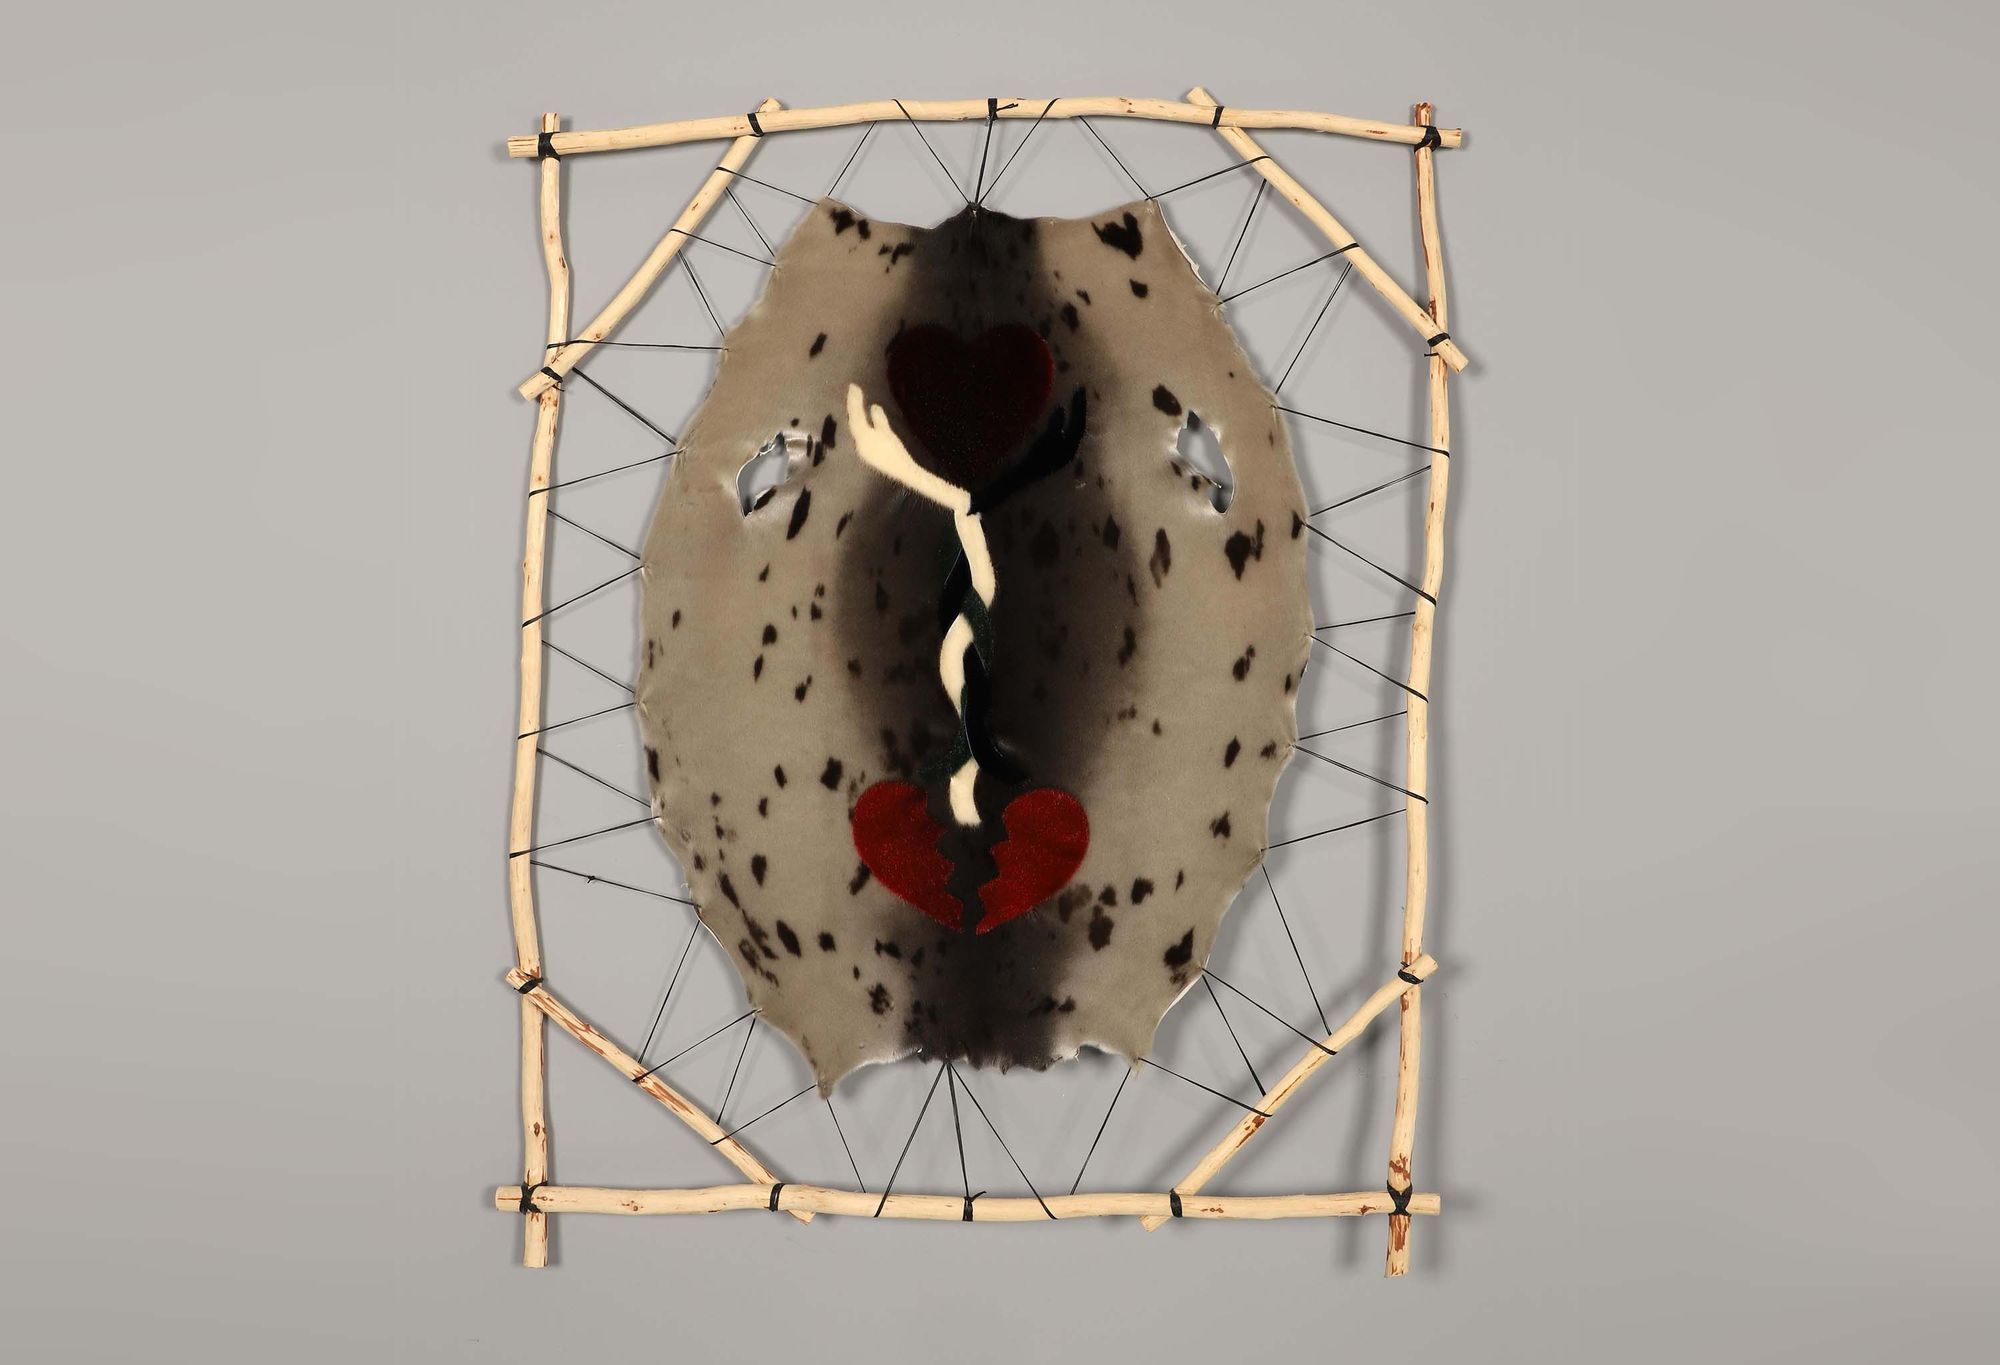 Art on sealskin depicting hearts and hands, stretched between a wooden frame